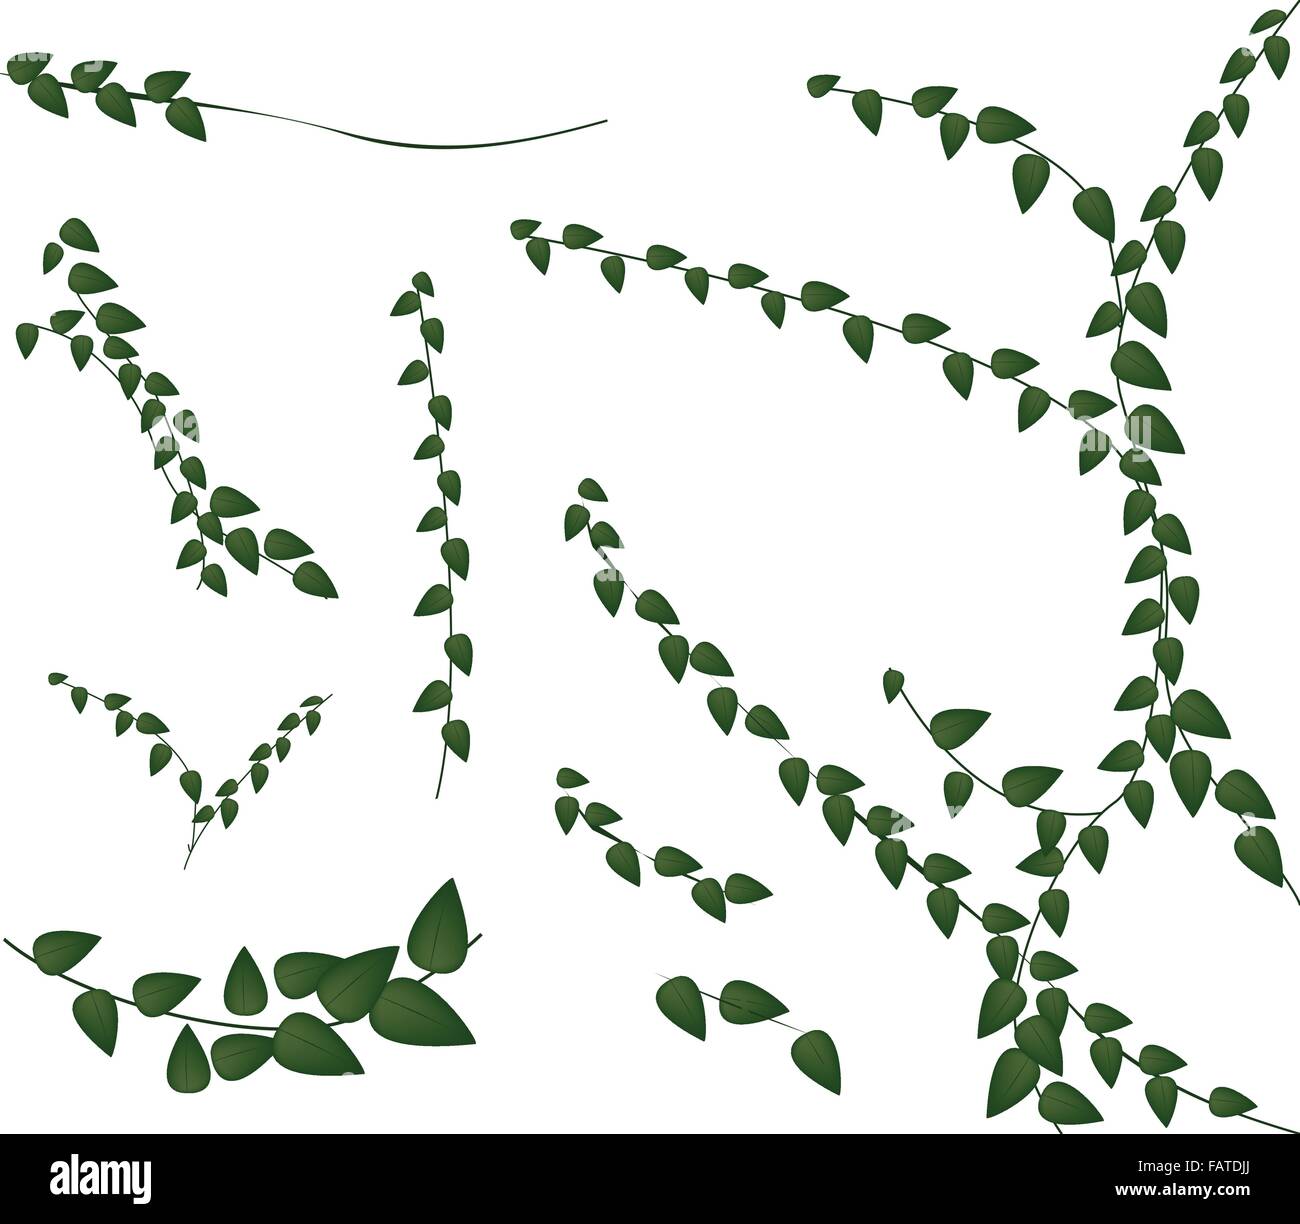 Ecological Concept, An Illustration Collection of Various Style of Ficus Pumila or Green Leaf Creeper Wall Plant Isolated on Whi Stock Vector